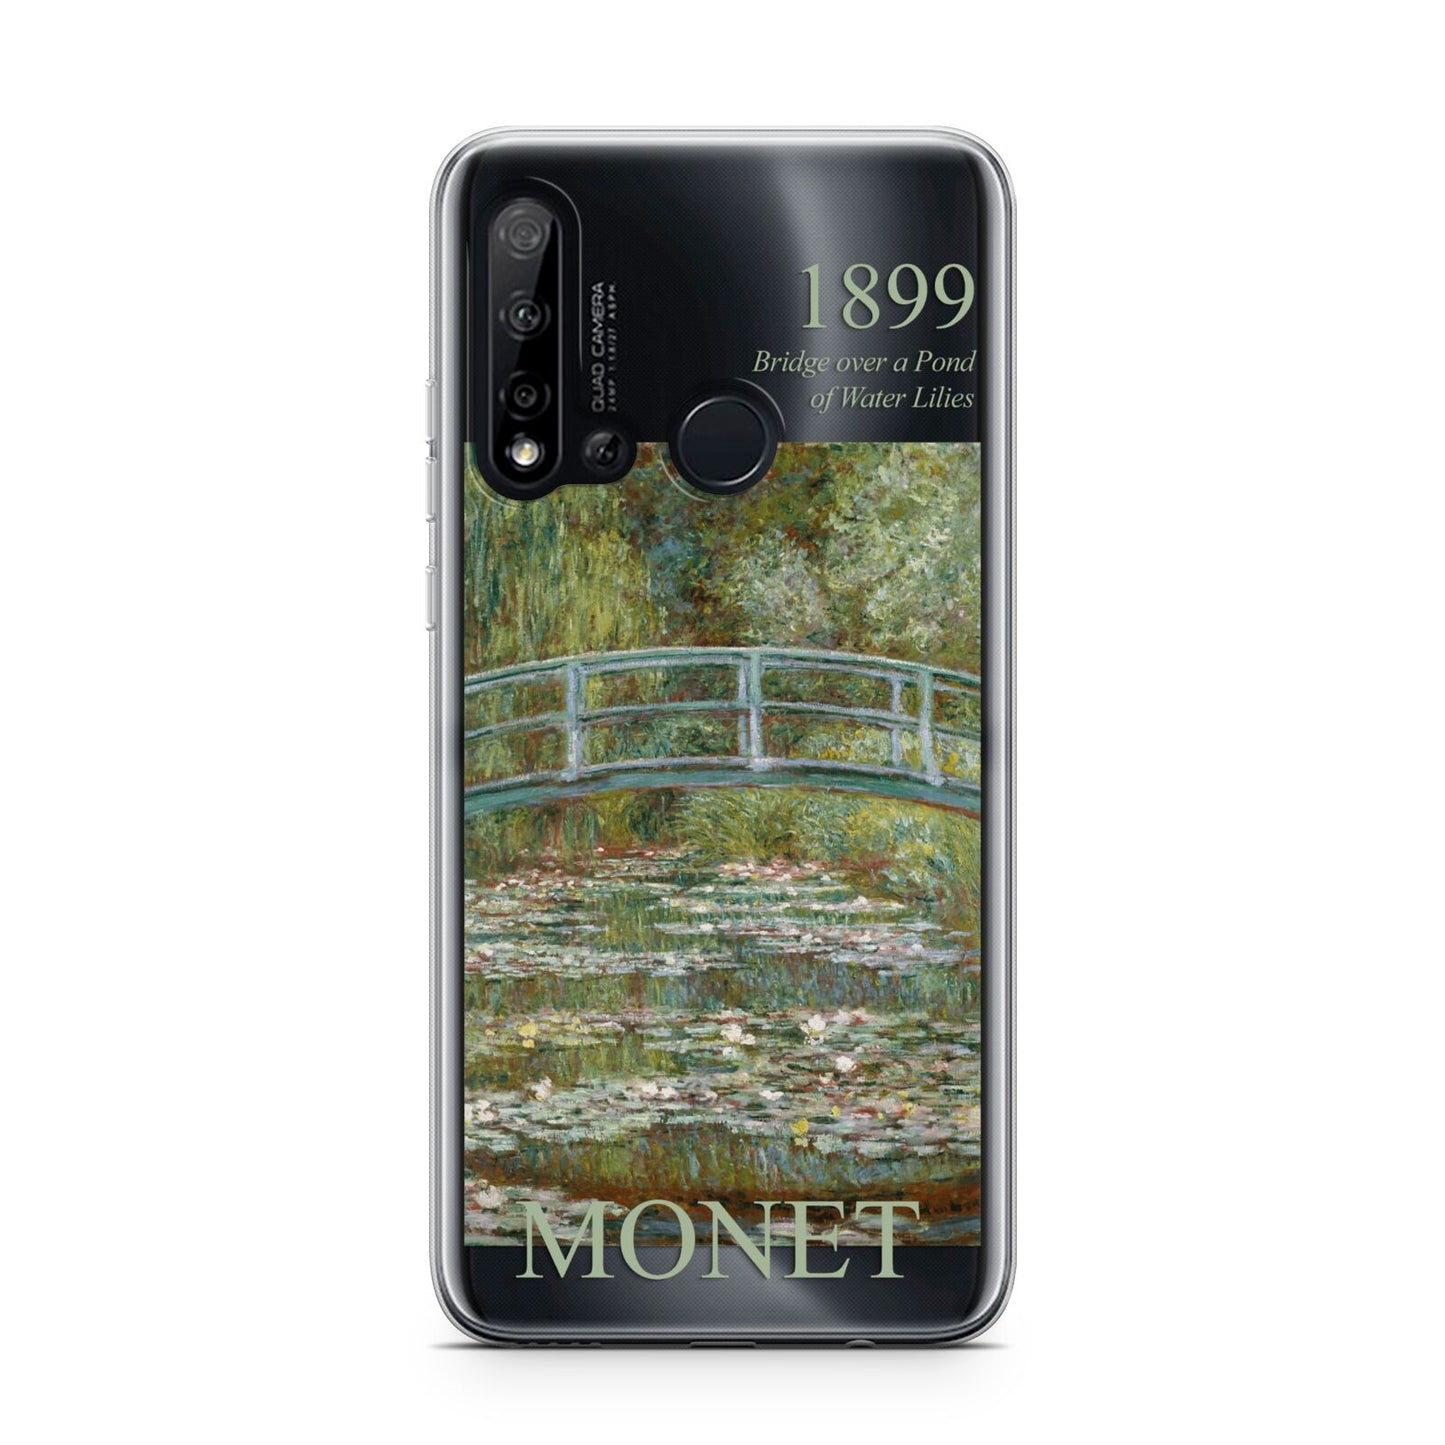 Bridge Over A Pond Of Water Lilies By Monet Huawei P20 Lite 5G Phone Case